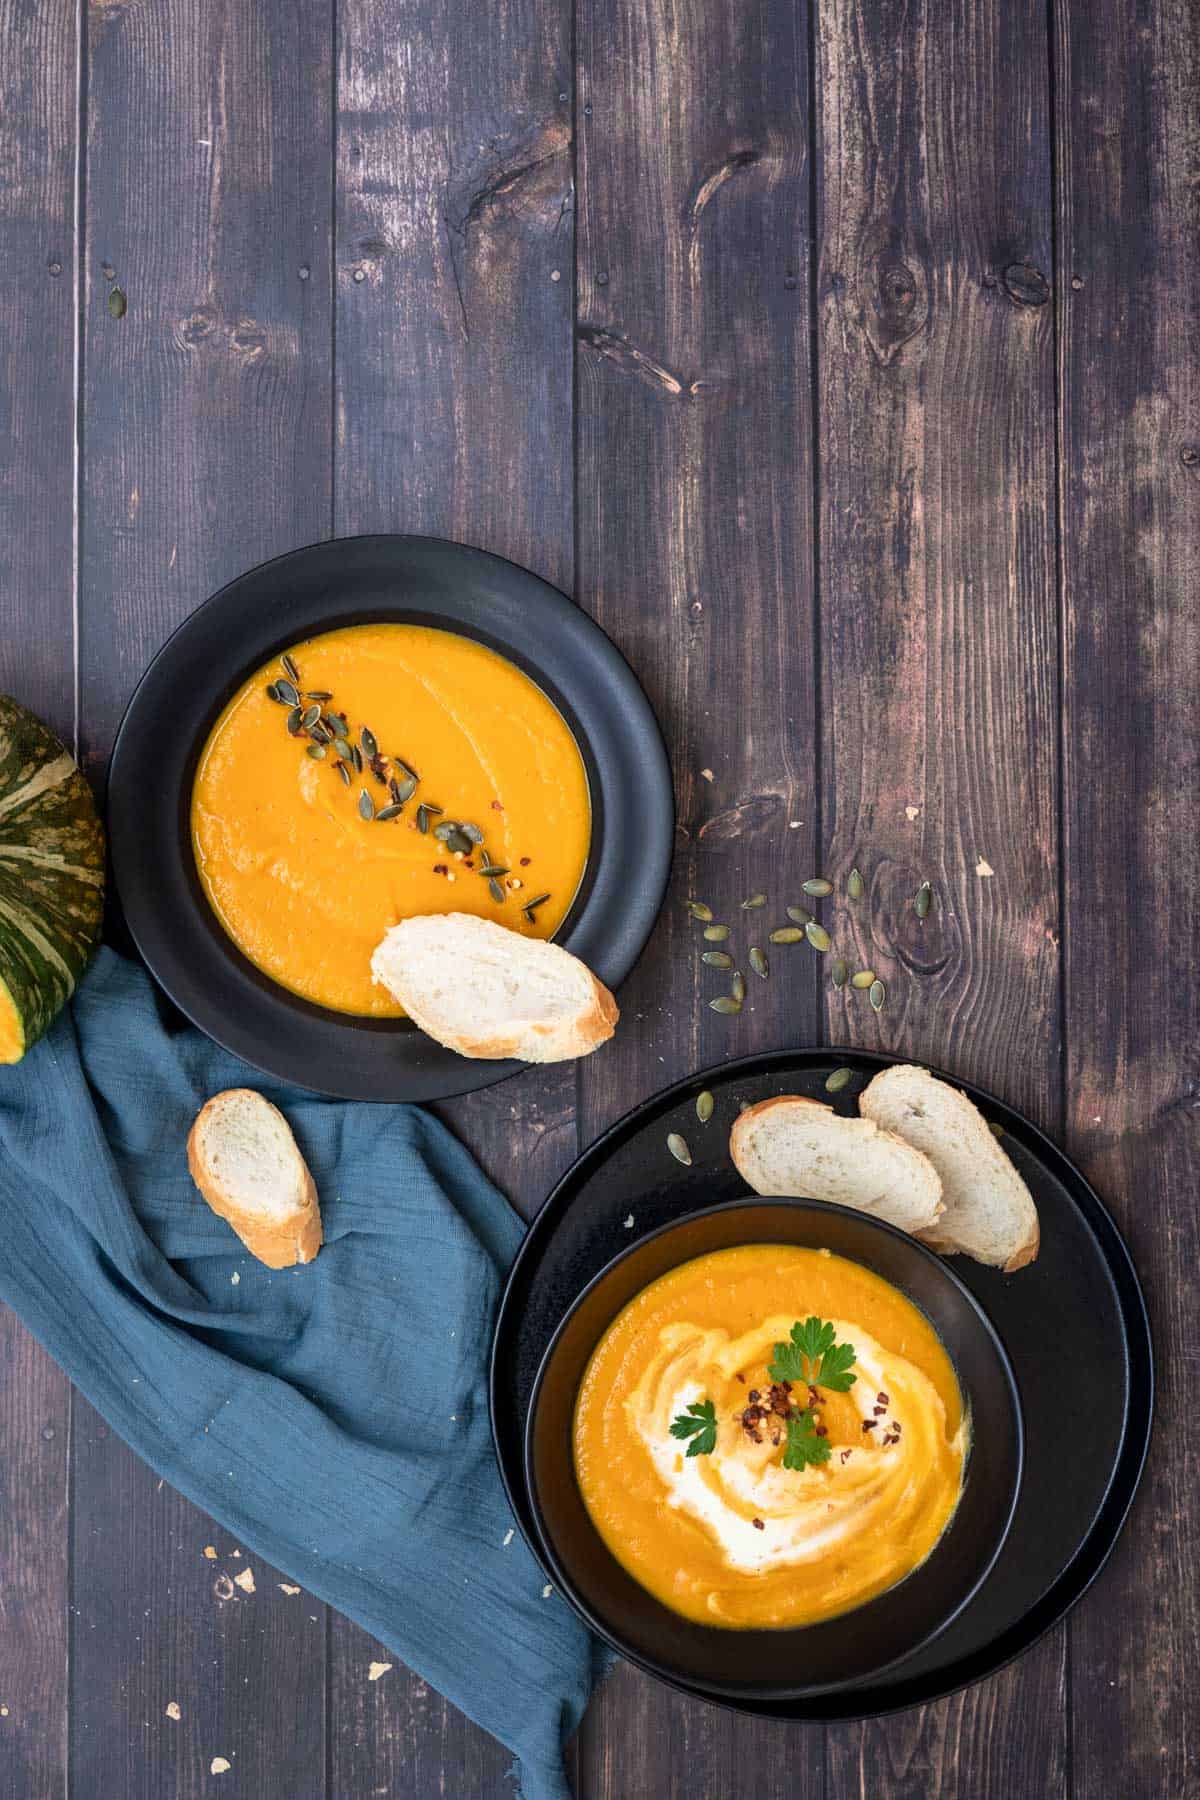 two servings of pumpkin carrot soup with slices of bread in a black soup plate.